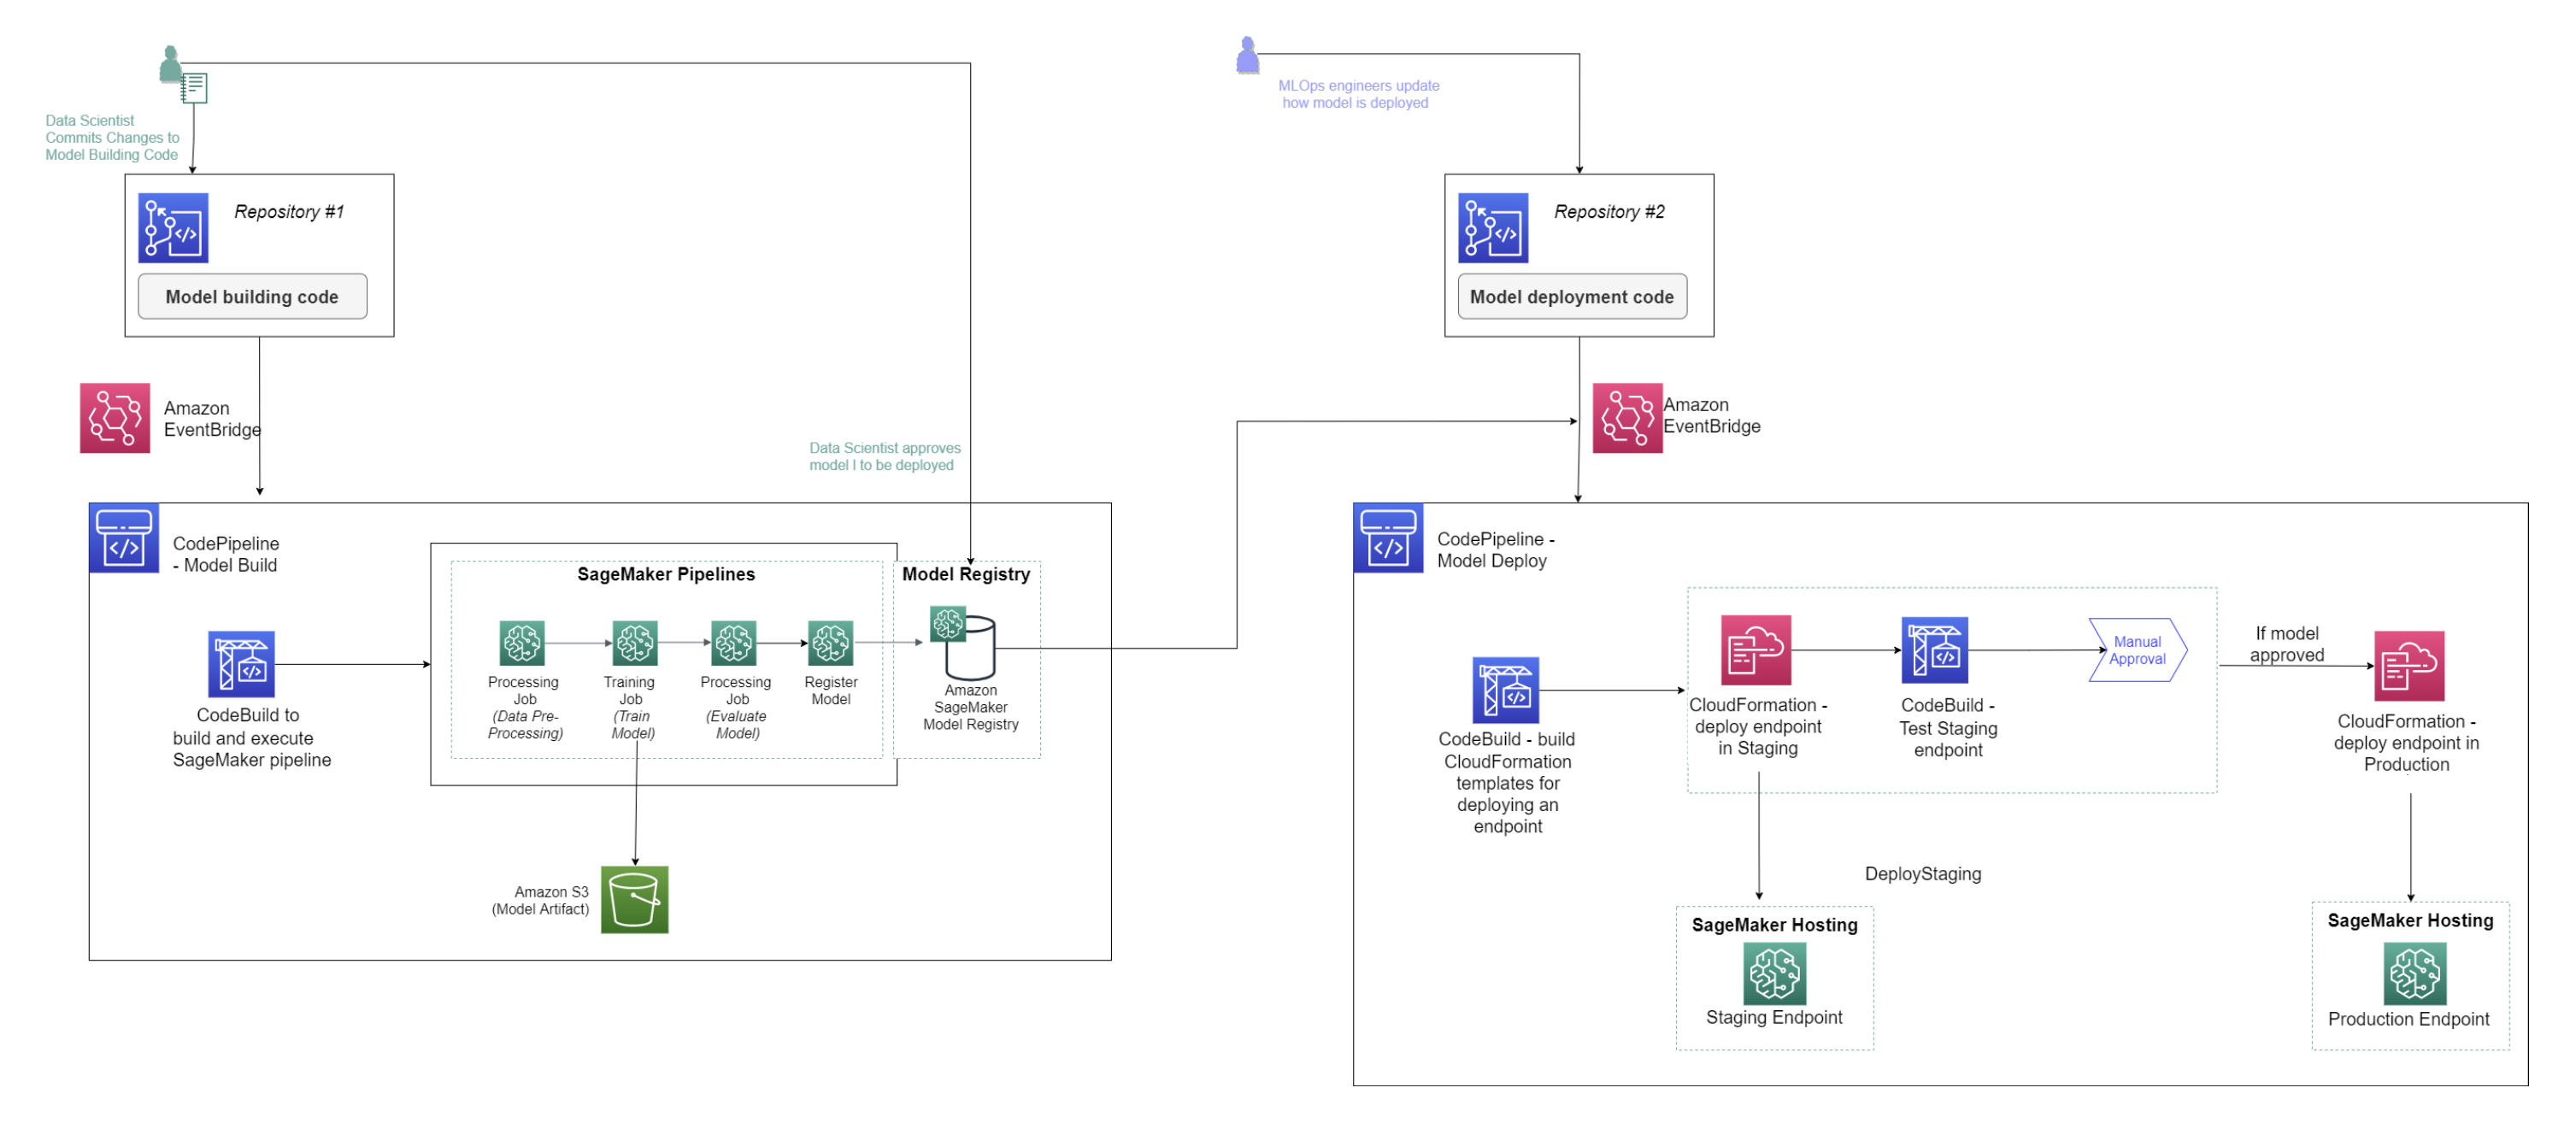 A ML workflow diagram for a pipeline that includes model
                    training and deployment steps.